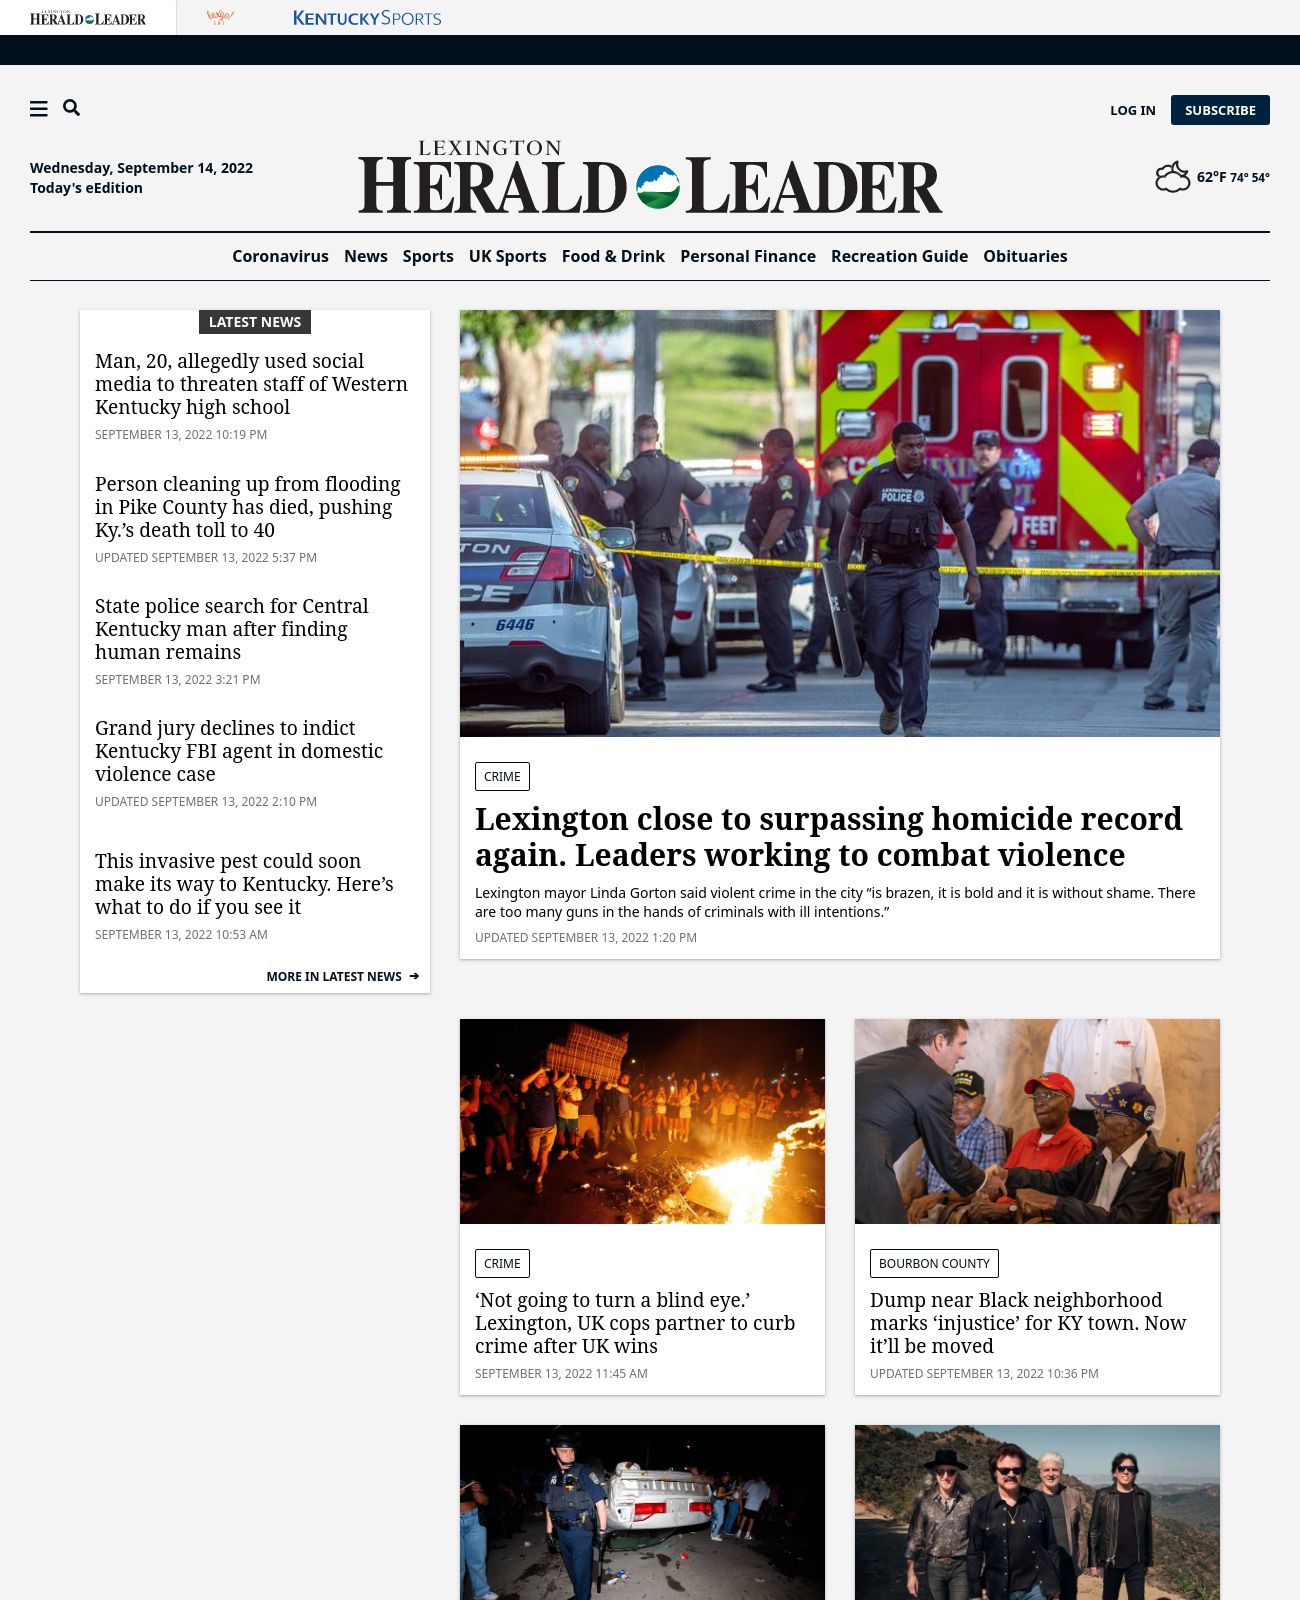 Lexington Herald-Leader at 2022-09-13 23:50:57-04:00 local time